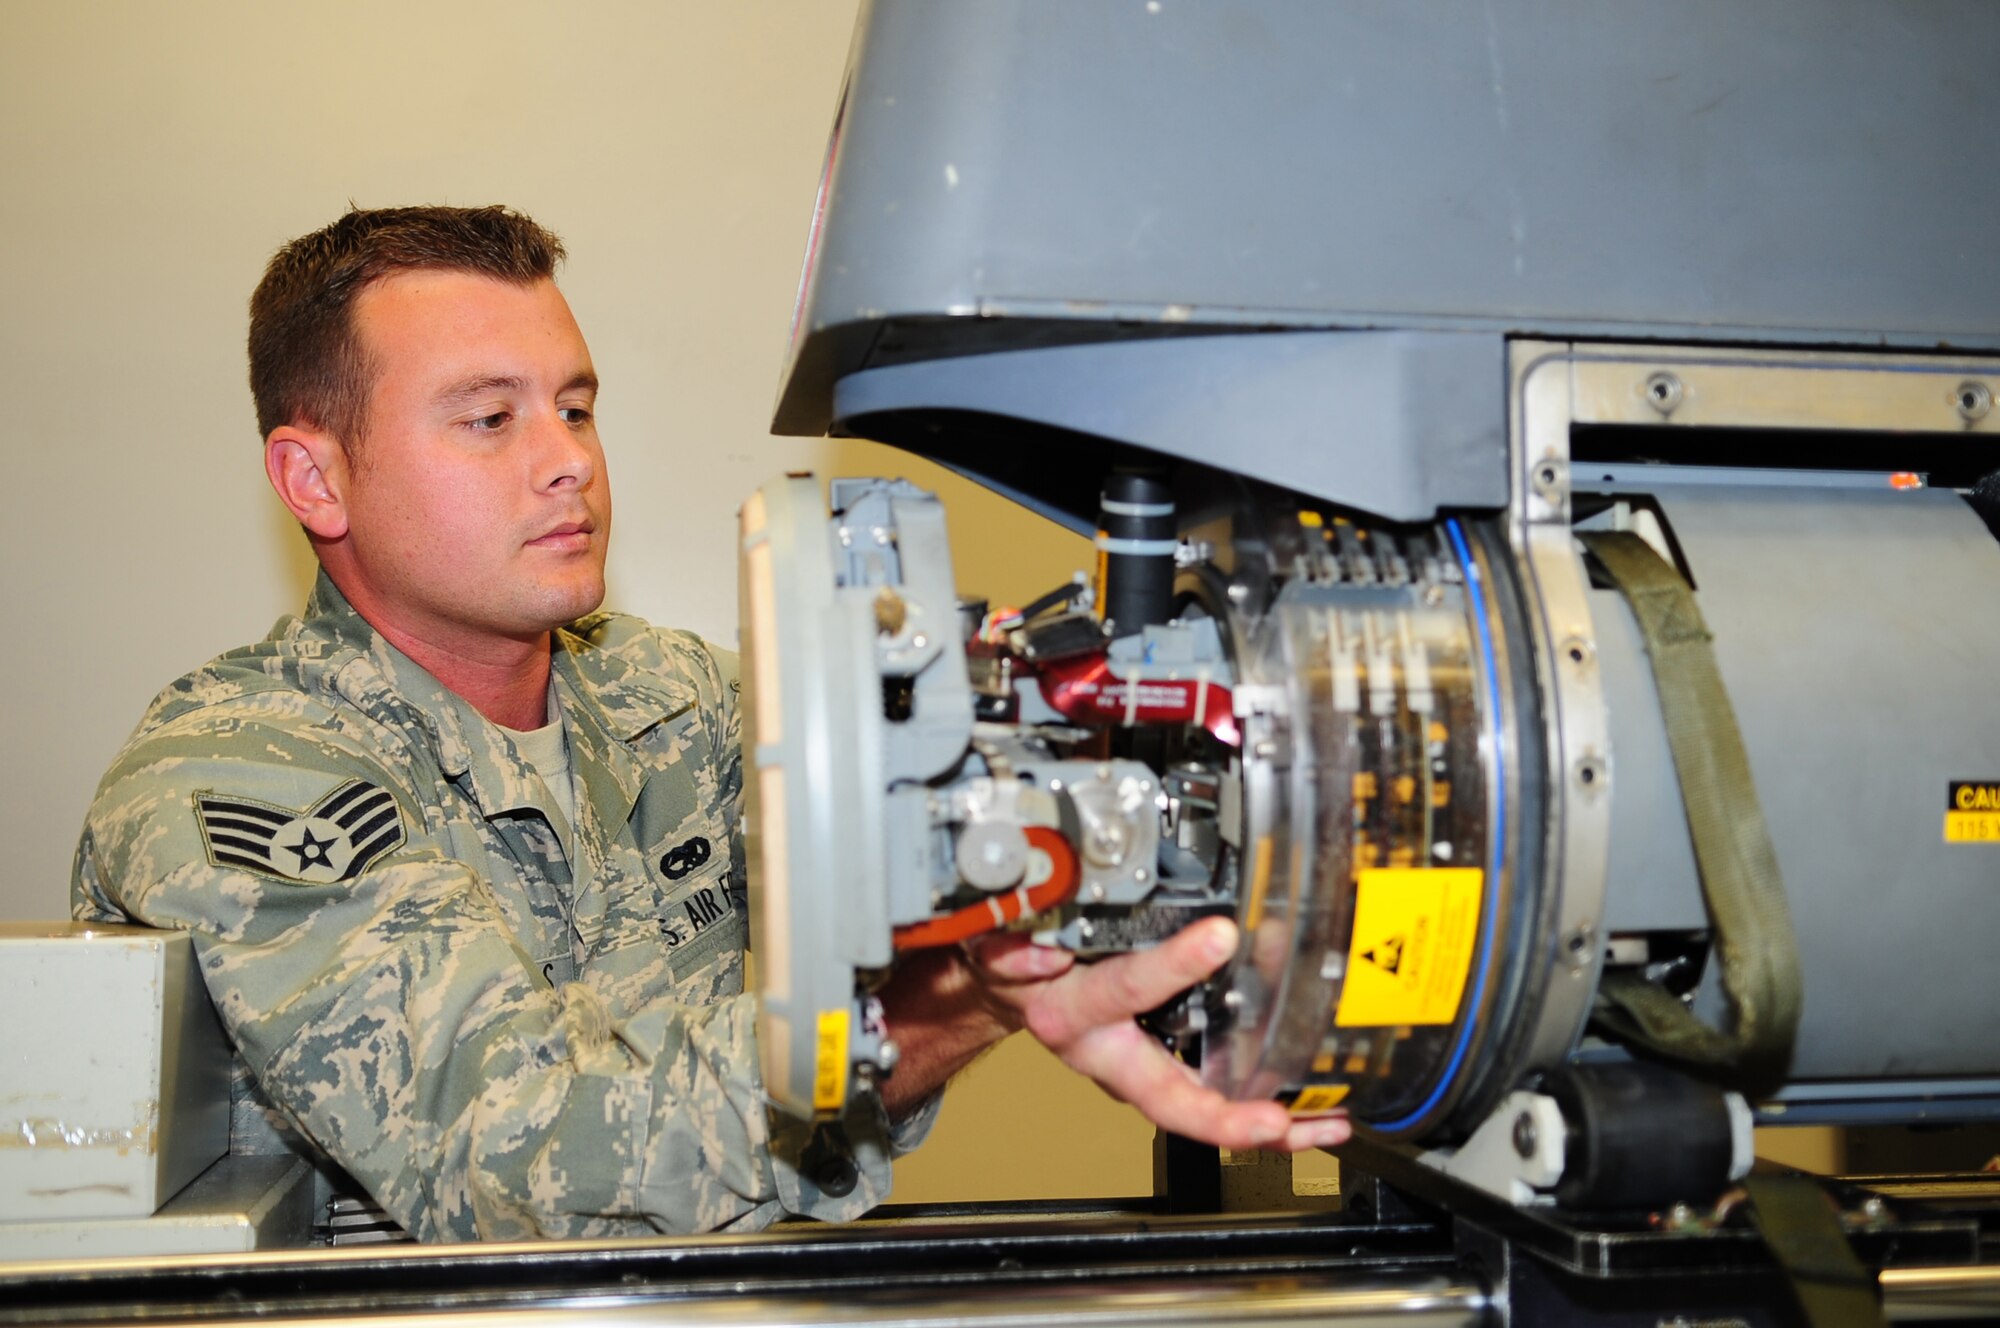 Staff Sgt. Christopher Woods, 4th Component Maintenance Squadron, reassembles a low-altitude-navigation-targeting-infrared-for-night navigation pod for an F-15E Strike Eagle at Seymour Johnson Air Force Base, N.C., March 10, 2009. Strike Eagles use navigation pods primarly for flying at night or in bad weather. (U.S. Air Force photo by Airman 1st Class Rae Perry)